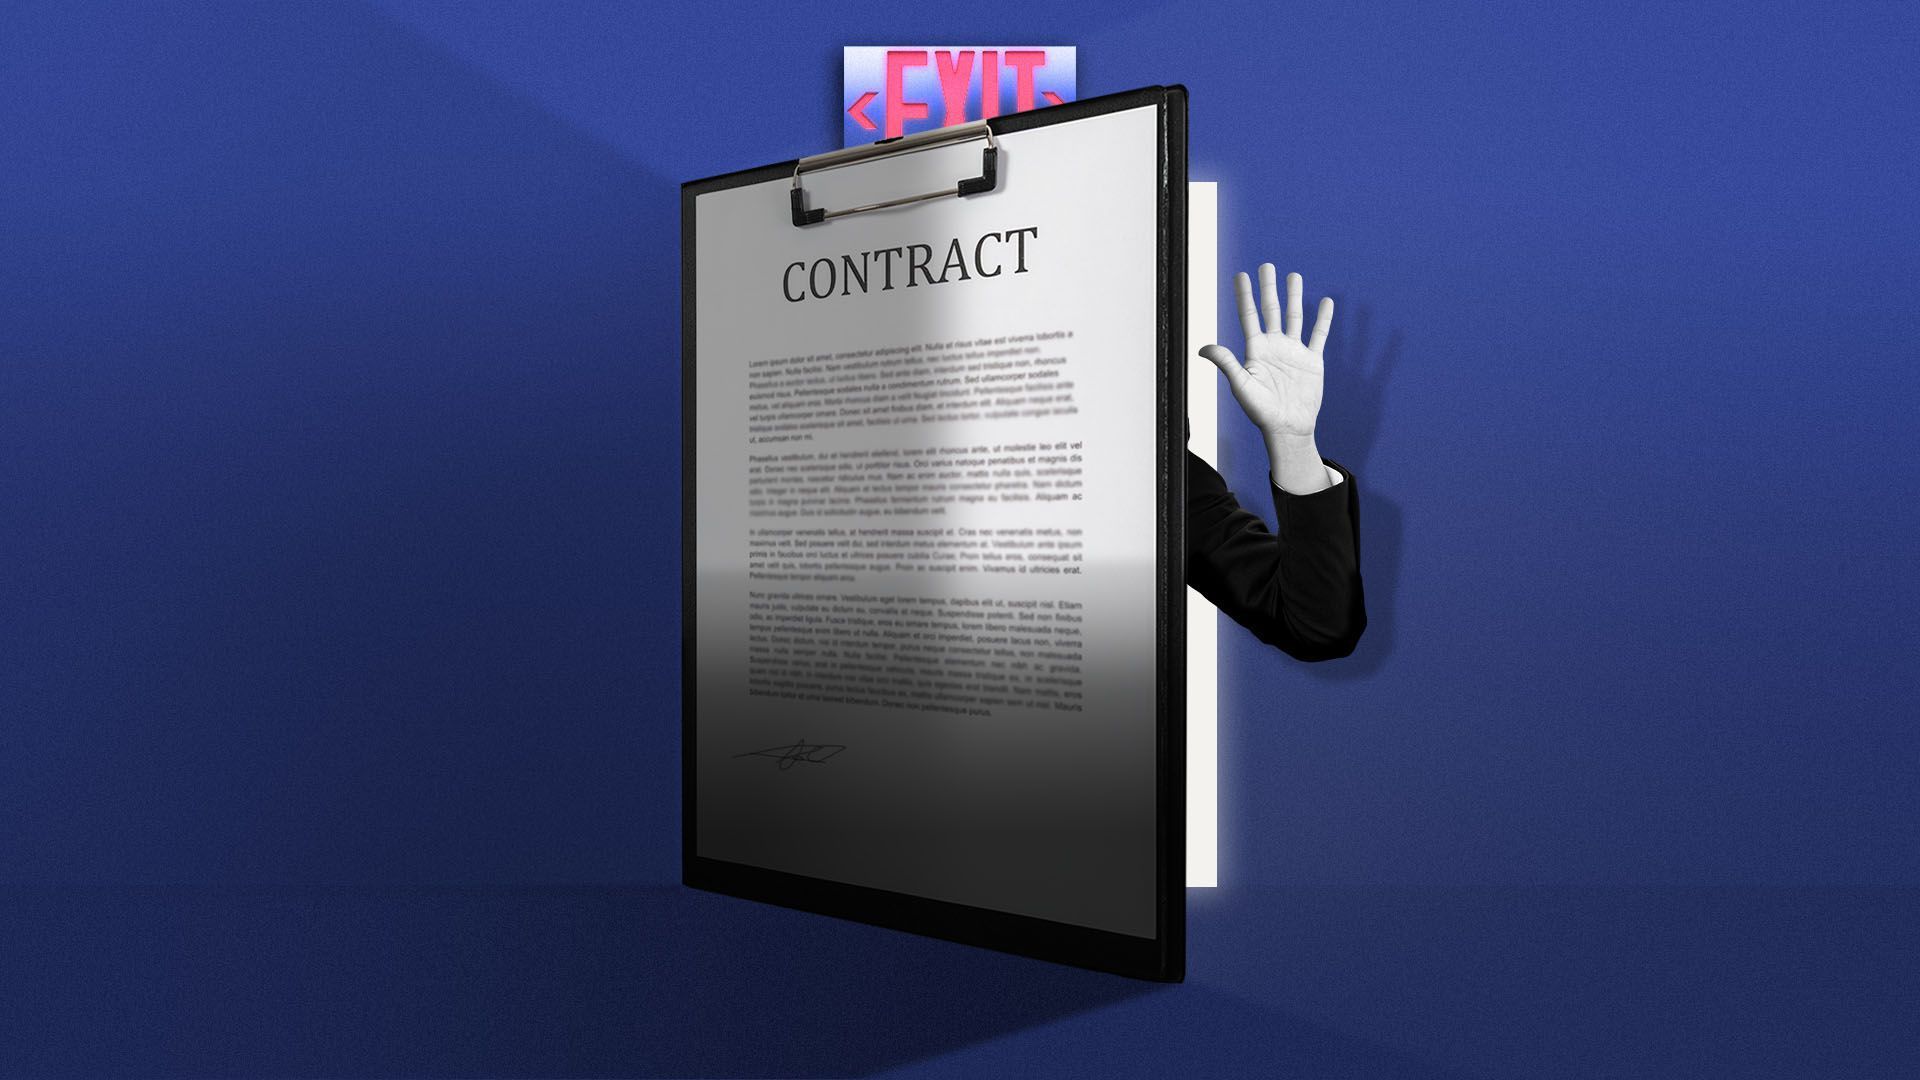 An illustration of a contract.